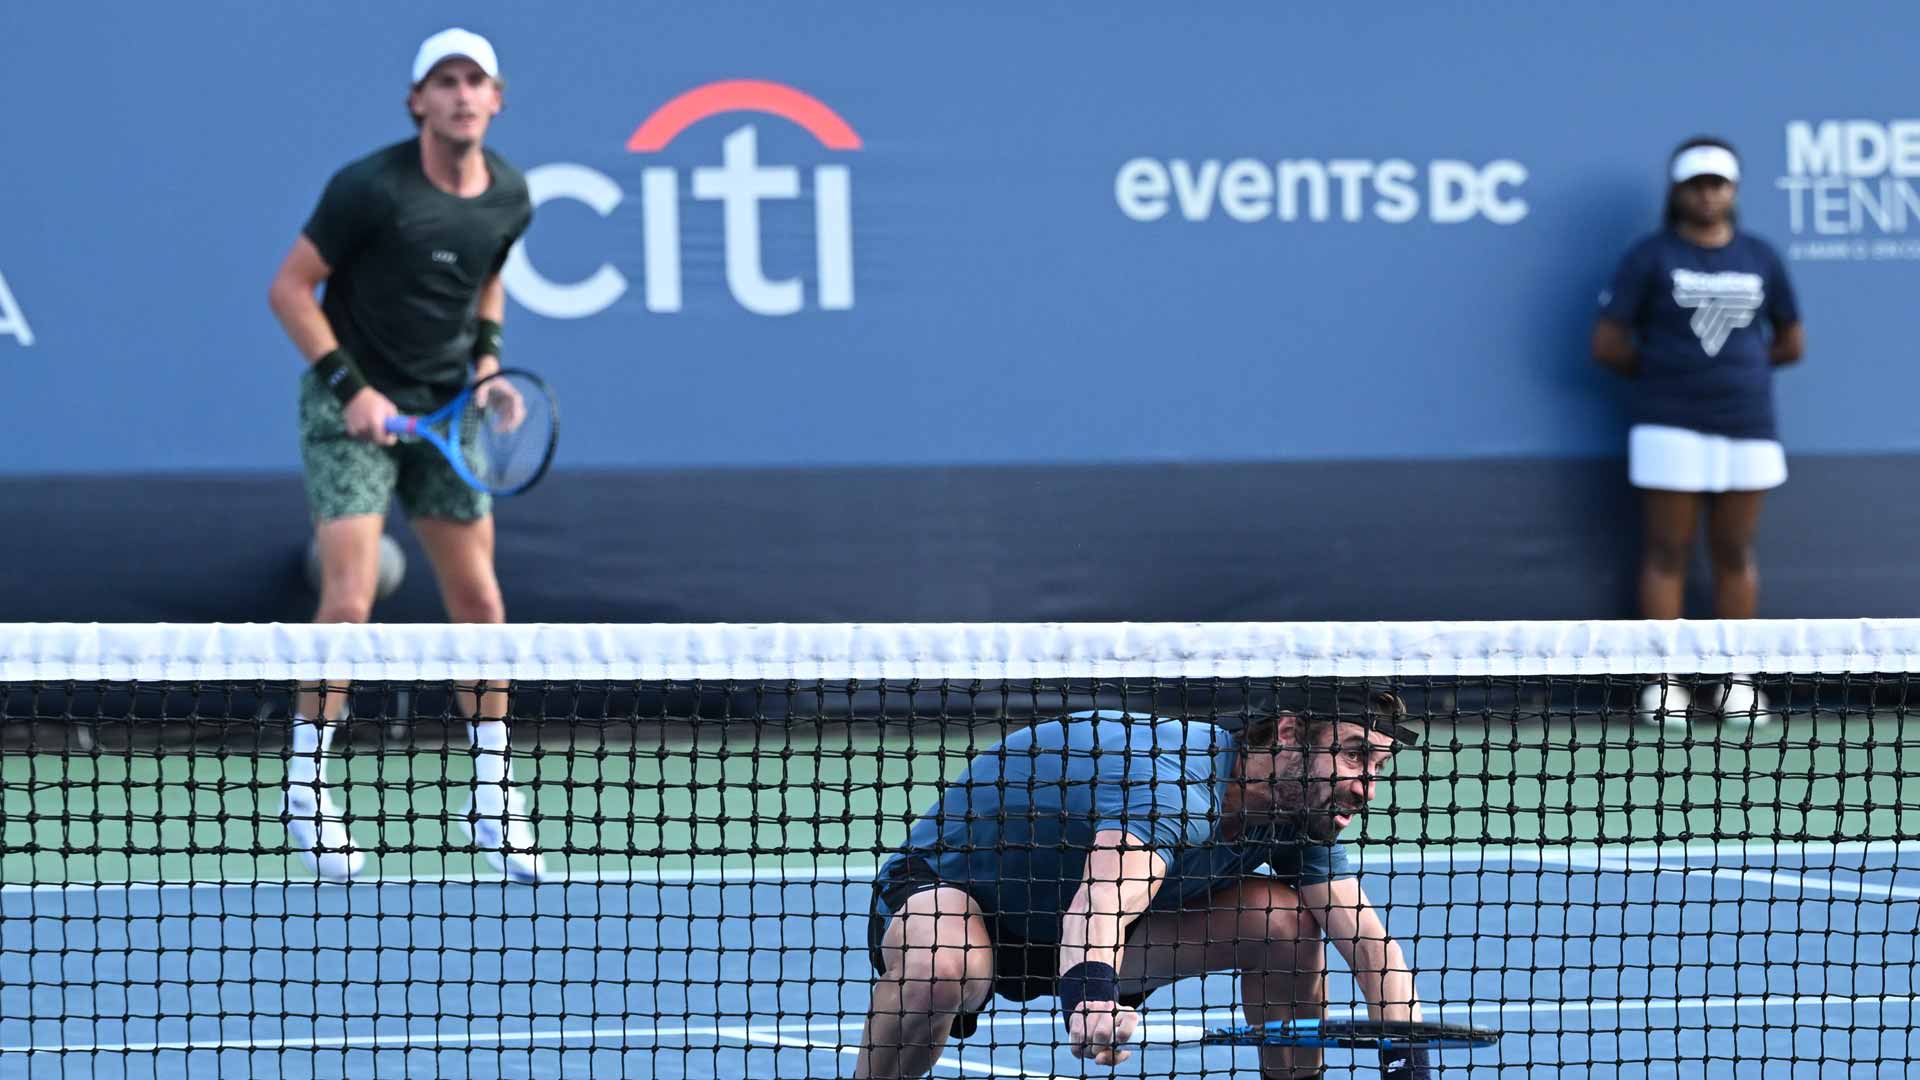 Max Purcell and Jordan Thompson in action Thursday at the Mubadala Citi DC Open.